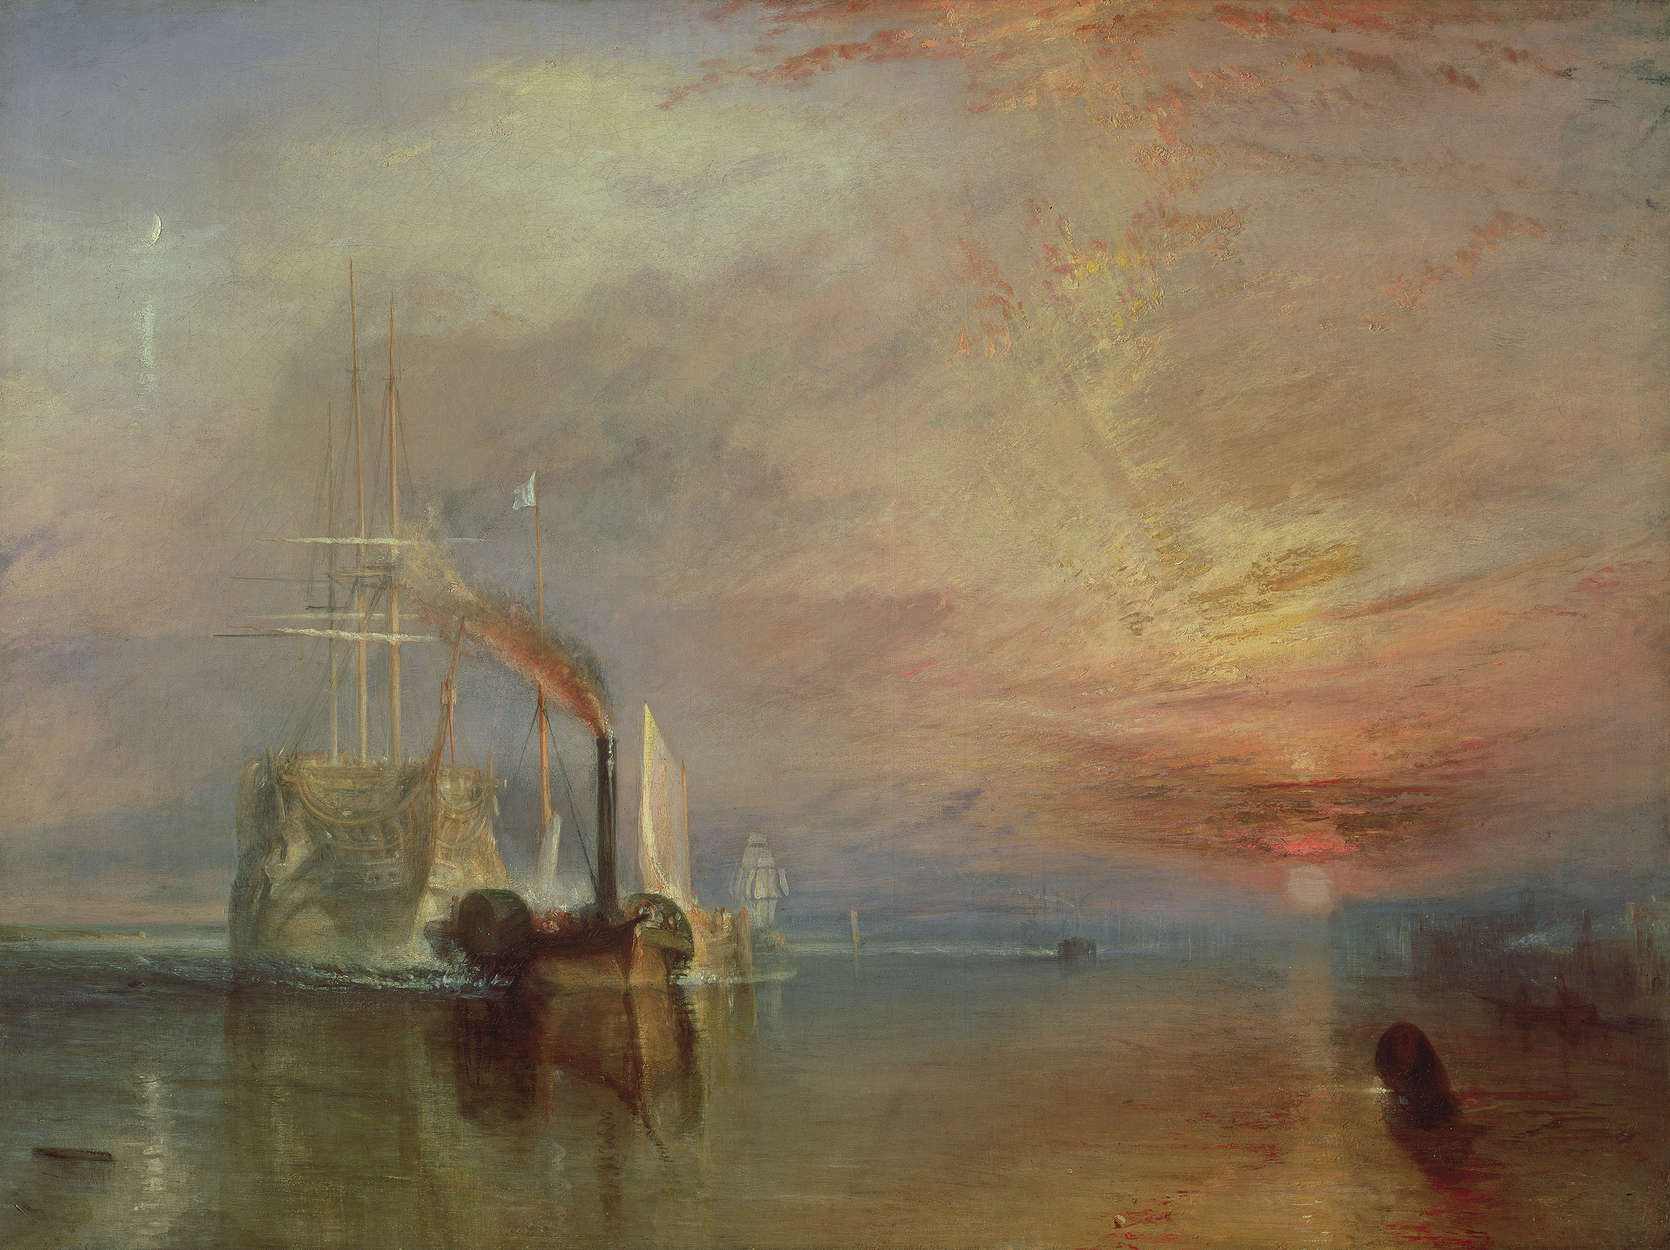             Photo wallpaper "The fighting Temeraire" by Joseph Turner
        